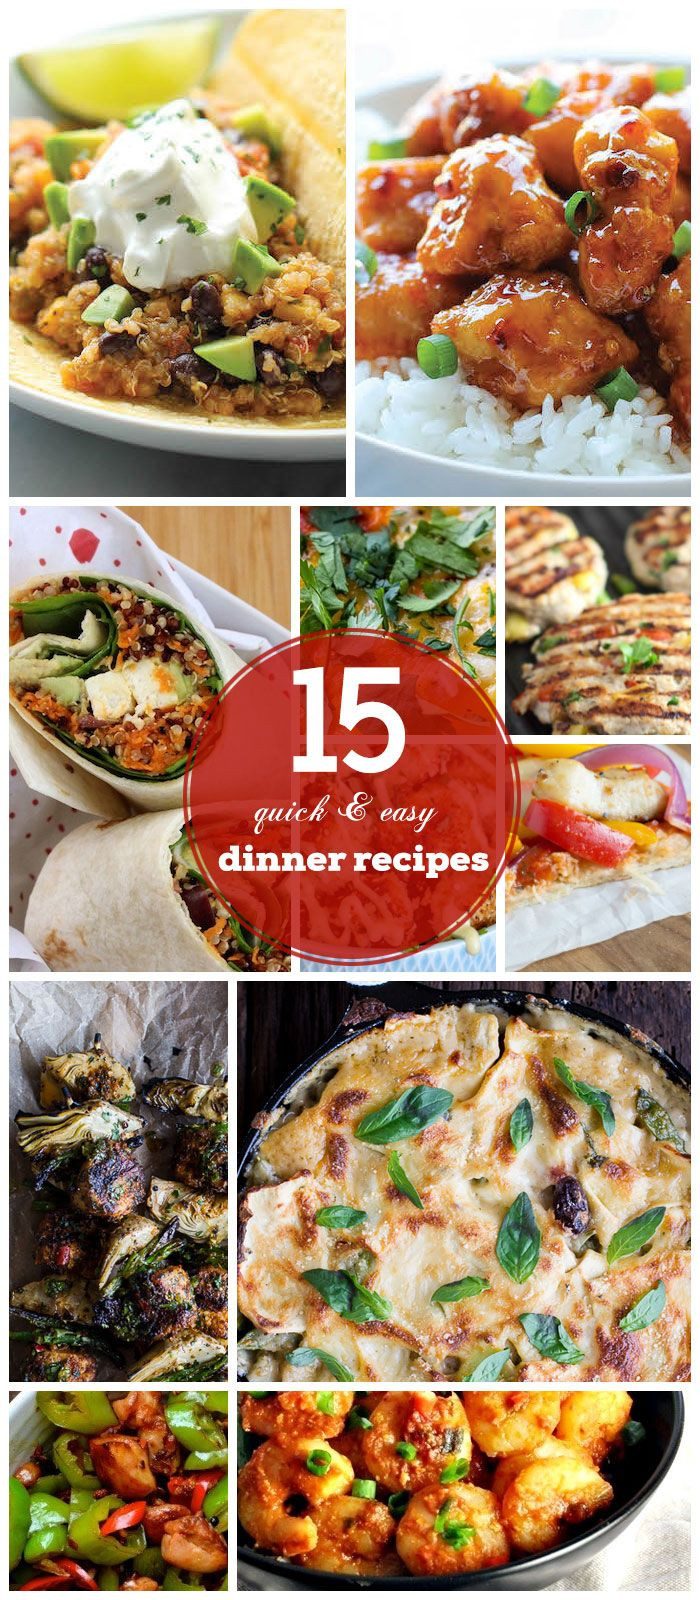 Easy Dinner Recipes For Family Cheap
 22 Quick & Easy Dinner Recipes for Family